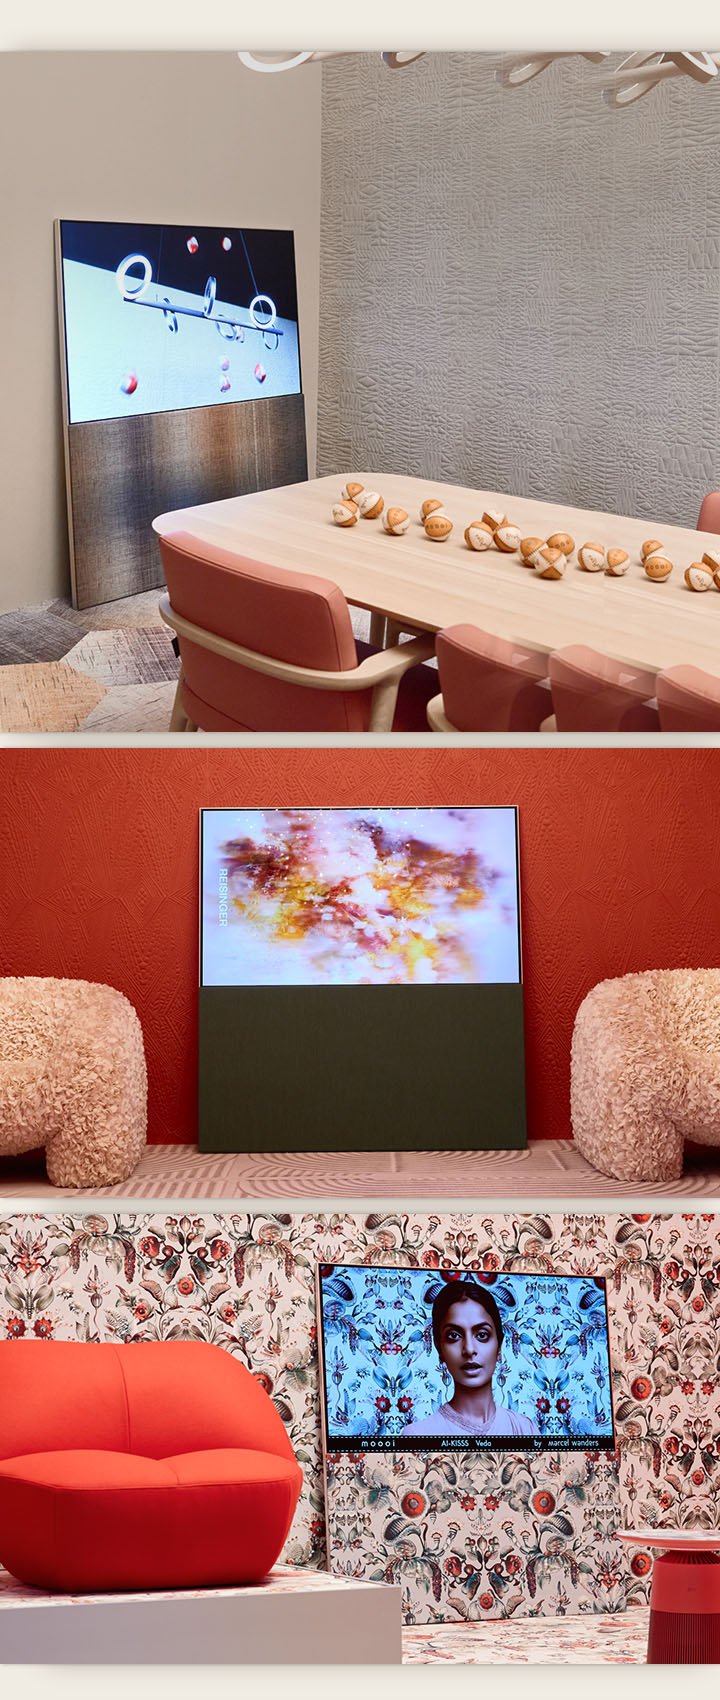 The top image shows Easel leaning against a wall in a neutral-colored room showing an abstract artwork featuring baseballs on the screen. Across from the TV sits a wooden table that also has baseballs on it. The bottom right image shows Easel leaning against a bright floral patterned wall with a red and green color scheme. A picture of a woman against the same background as the surrounding wall is on the screen. The fabric textured stand also has the same pattern. Beside the TV, there is a red one-person sofa. The bottom left image shows Easel leaning against a textured terracotta-colored wall. An abstract red, orange, and purple image fills the screen. On either side of the TV, there are beige, textured one-person sofas.